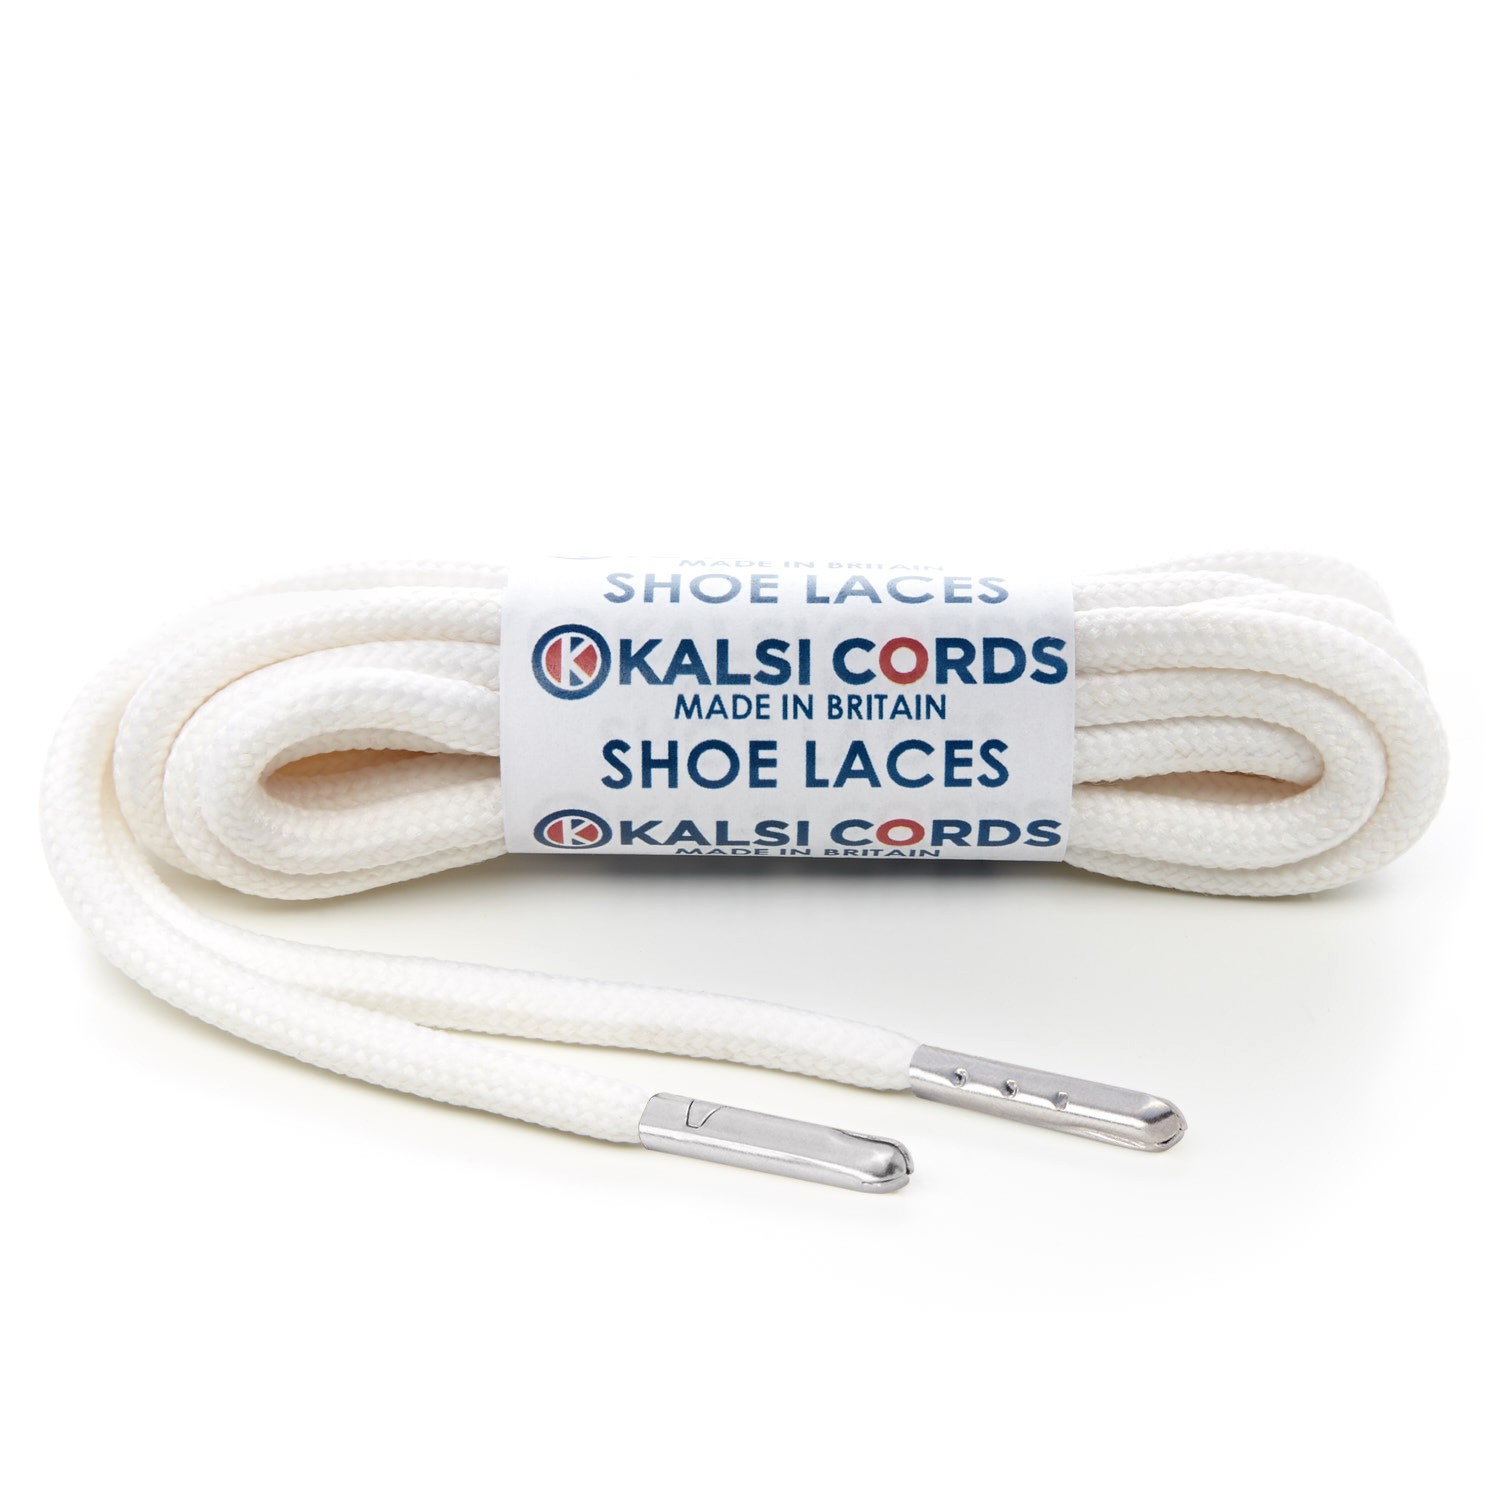 T621 5mm Round Polyester Shoe Laces Ecru off white 1 Silver Metal Tip Kalsi Cords